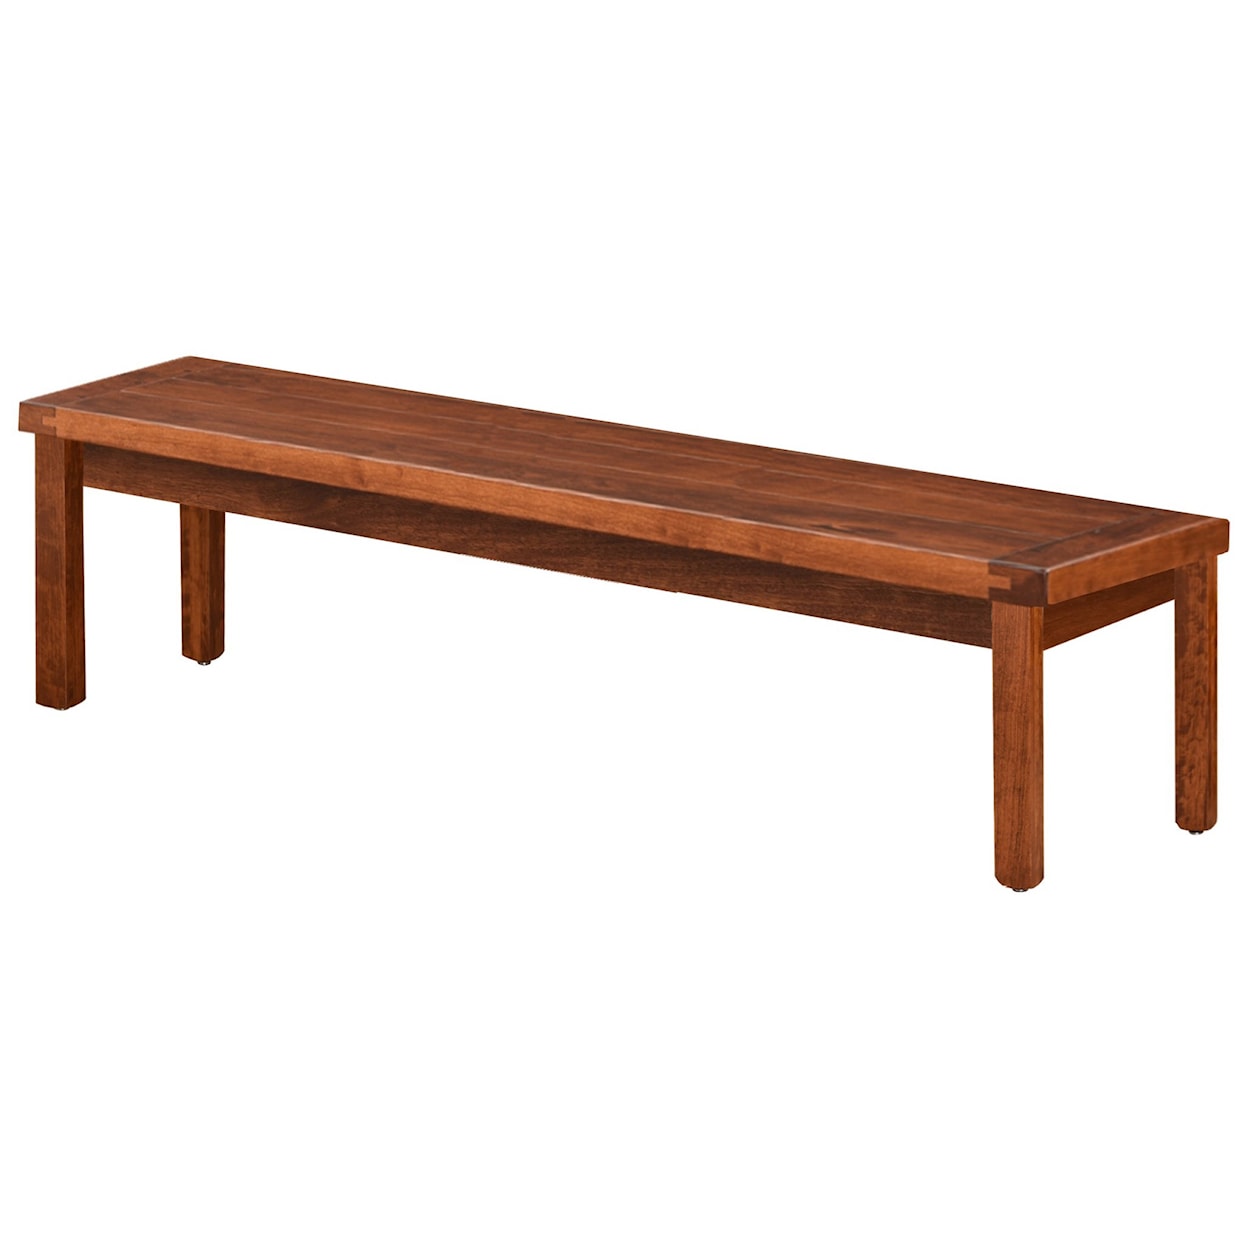 Trailway Amish Wood Sutter Mills 48" Dining Bench